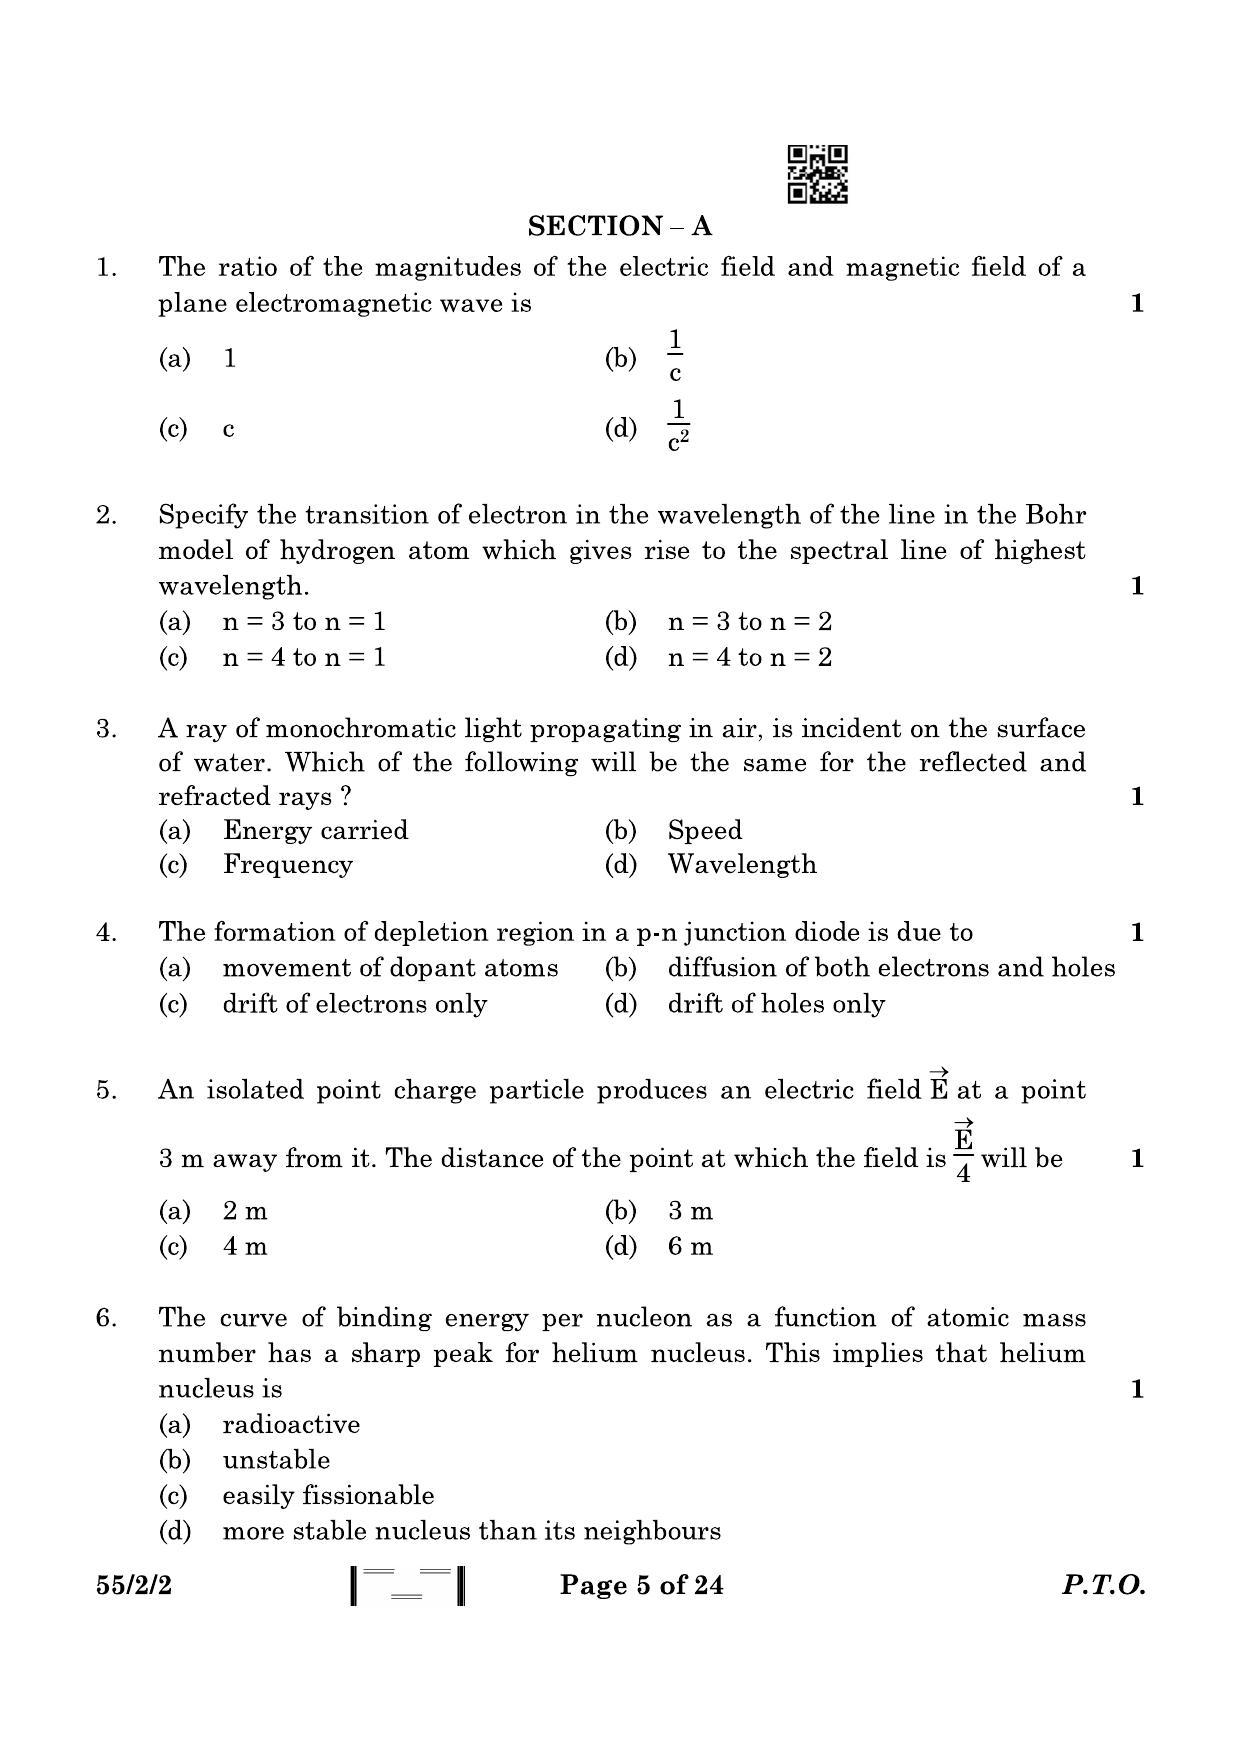 CBSE Class 12 55-2-2 Physics 2023 Question Paper - Page 5